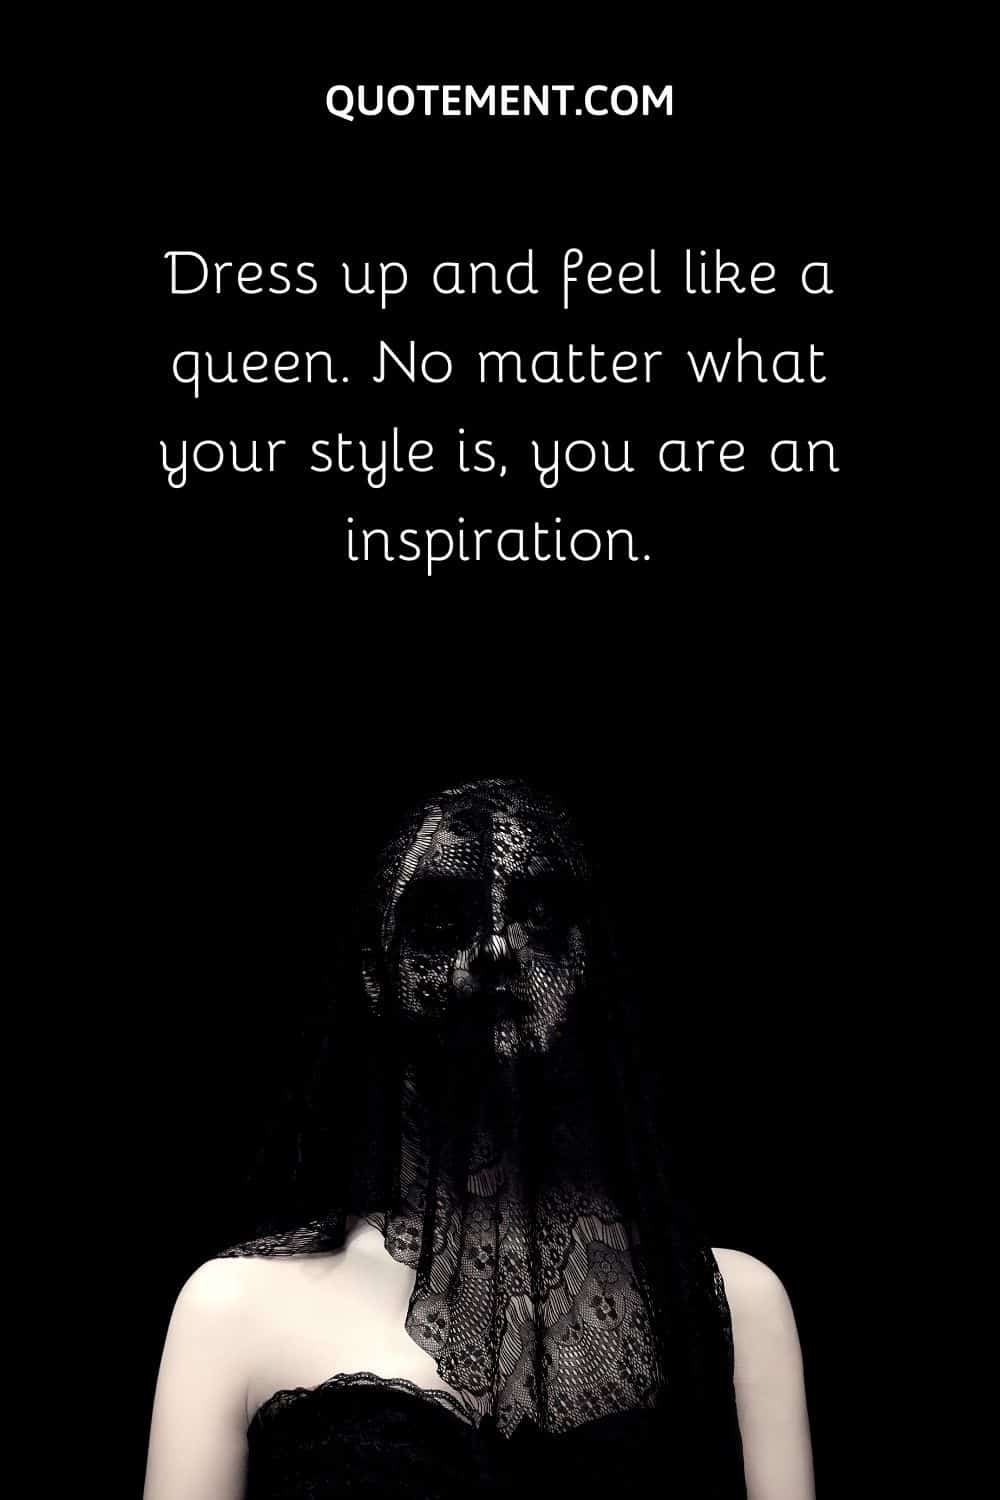 Dress up and feel like a queen